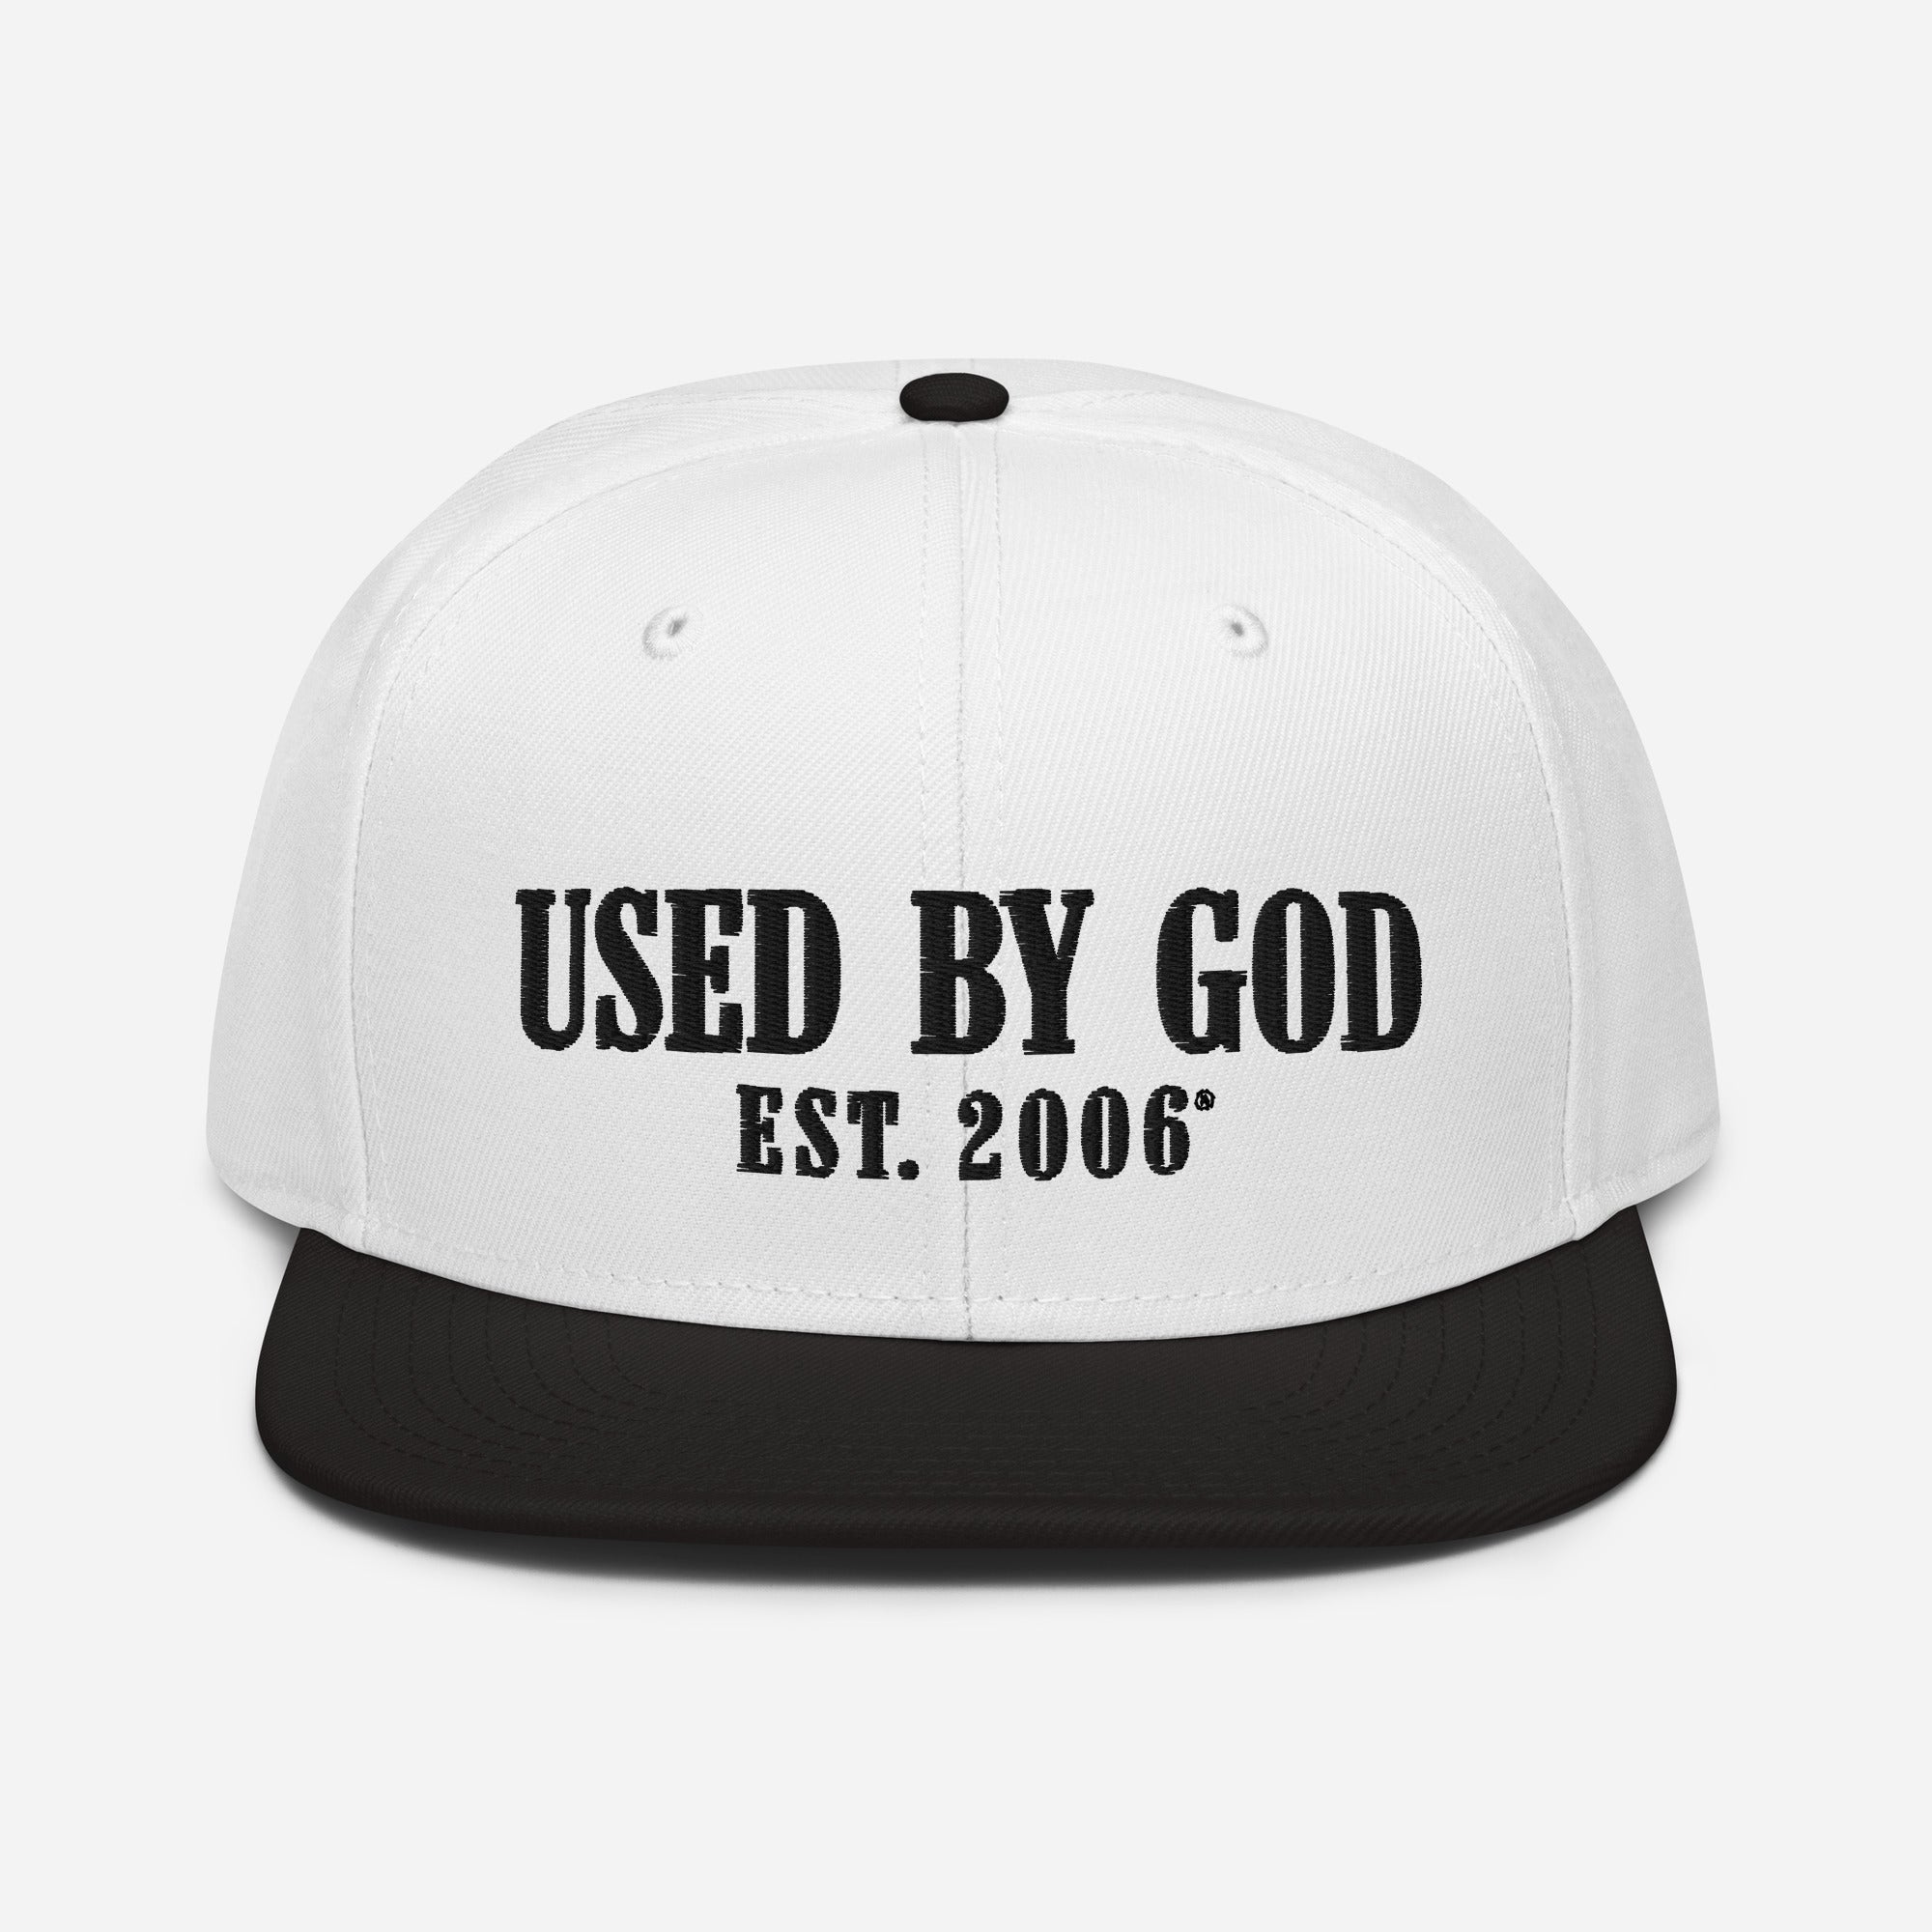 Used By God Est. 2006 BW Snapback Hat, Used By God, Used By God Clothing, Christian Apparel, Christian Hats, Christian T-Shirts, Christian Clothing, God Shirts, Christian Sweatshirts, God Clothing, Jesus Hoodie, Jesus Clothes, God Is Dope, Art Of Homage, Red Letter Clothing, Elevated Faith, Active Faith Sports, Beacon Threads, God The Father Apparel